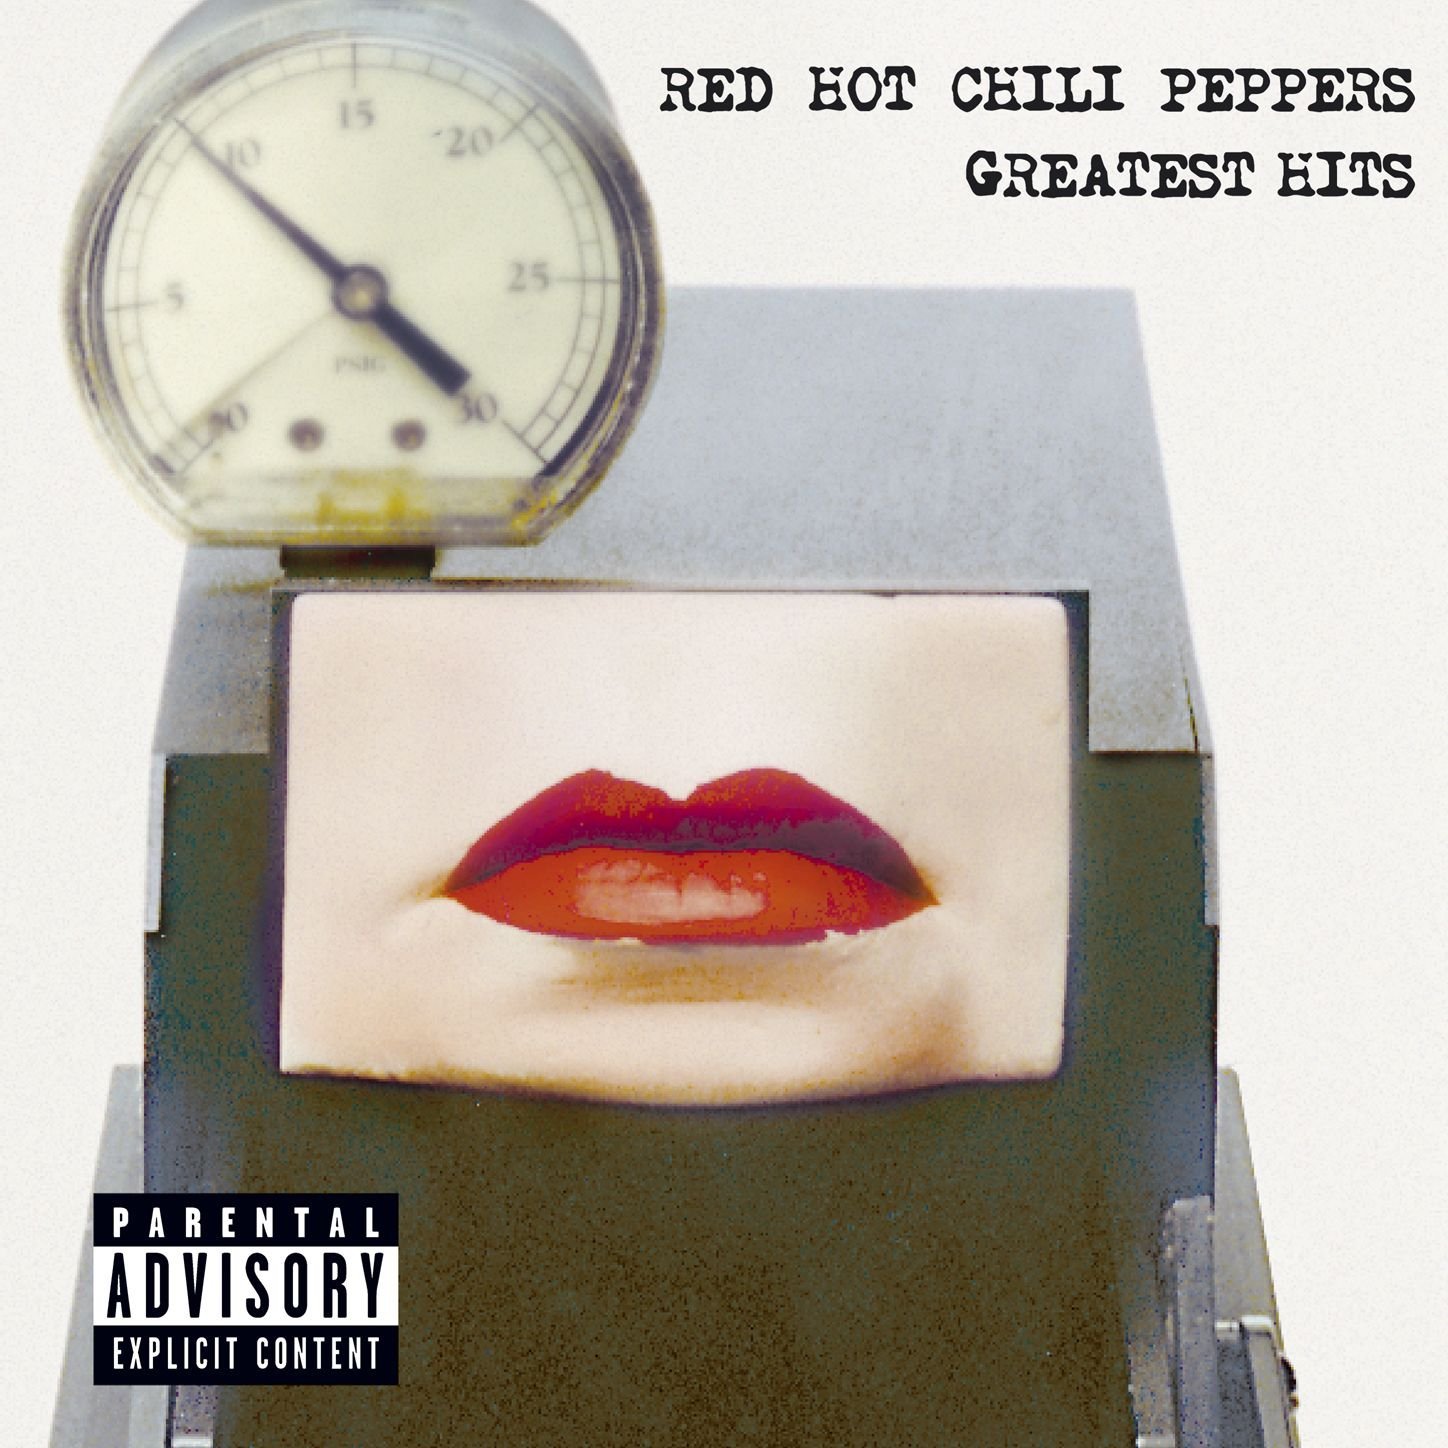 Red Hot Chili Peppers - Greatest Hits (2003/2014) [Qobuz FLAC 24bit/96kHz]